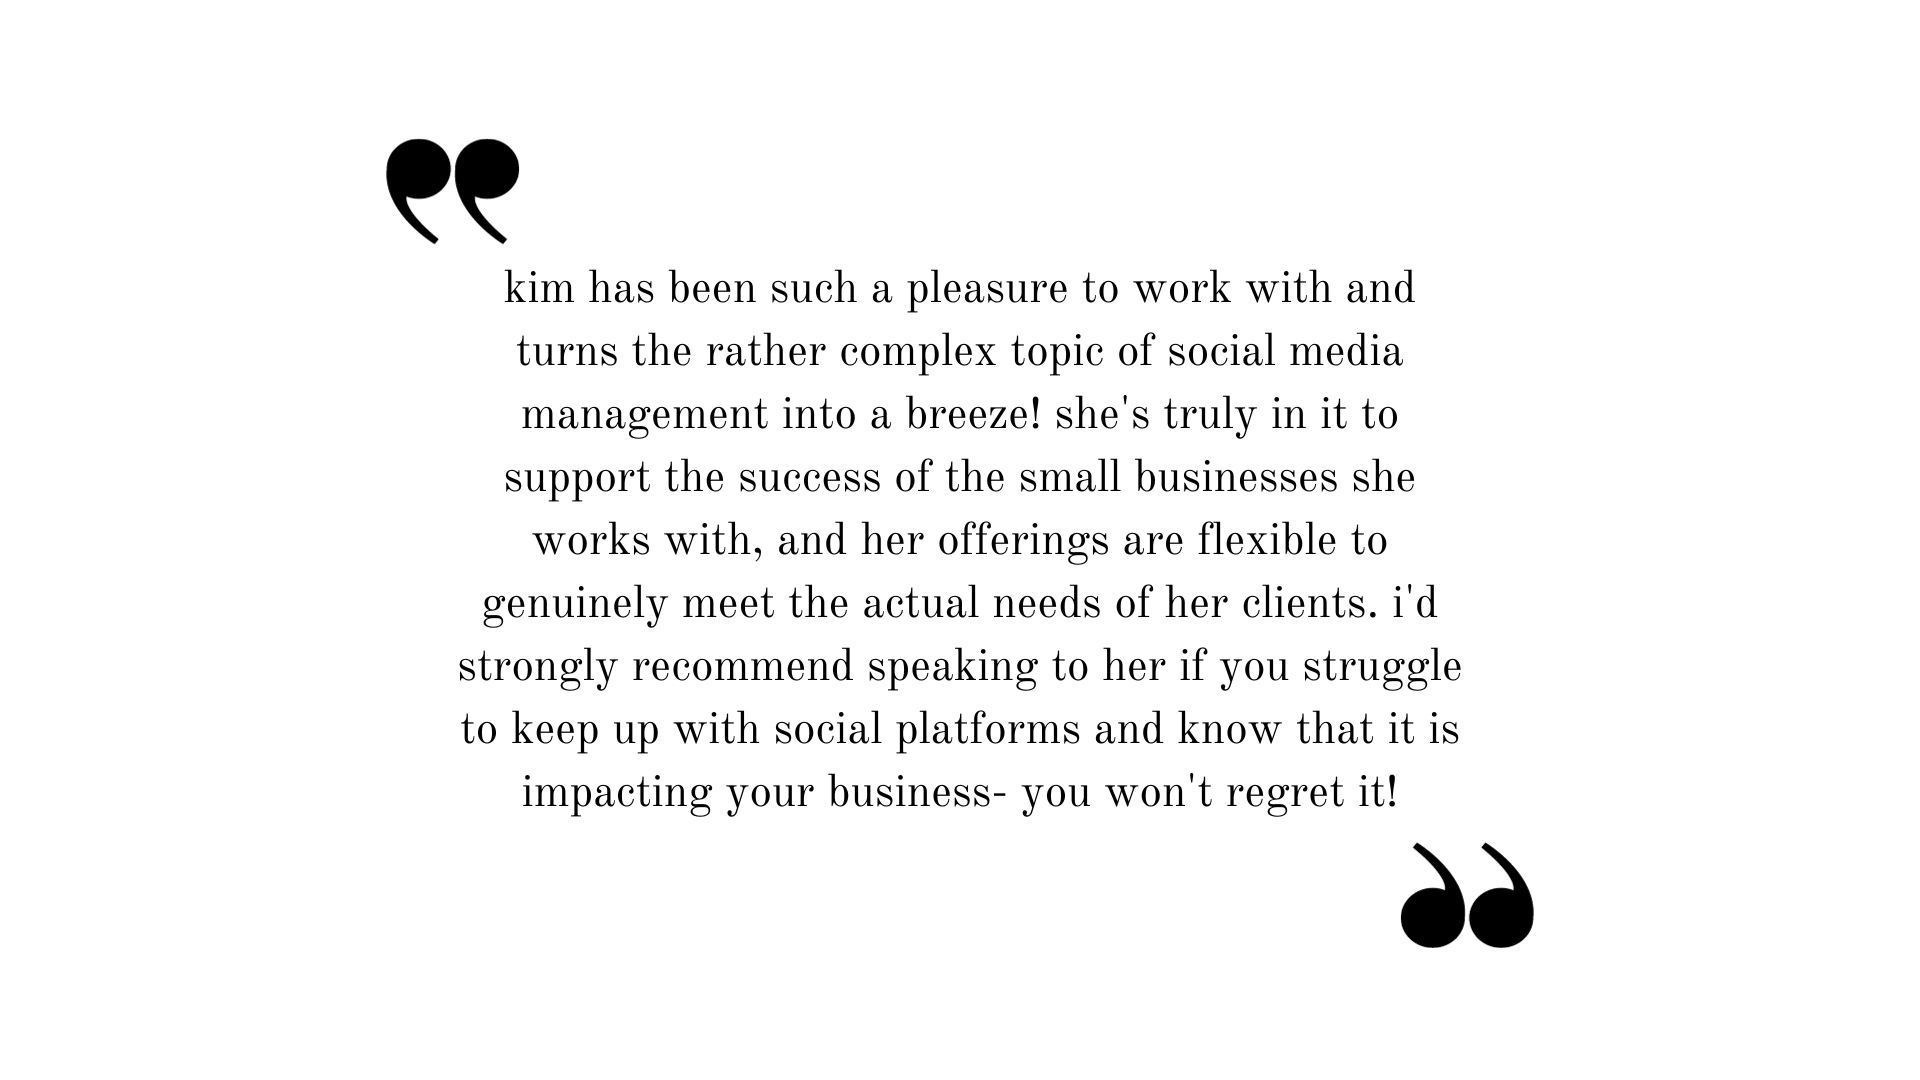 Testimonial: Kim has been such a pleasure to work with and turns the rather complex topic of social media management into a breeze! She's truly in it to support the success of the small businesses she works with, and her offerings are flexible to genuinely meet the actual needs of her clients. I'd strongly recommend speaking to her if you struggle to keep up with social platforms and know that it is impacting your business- You won't regret it!